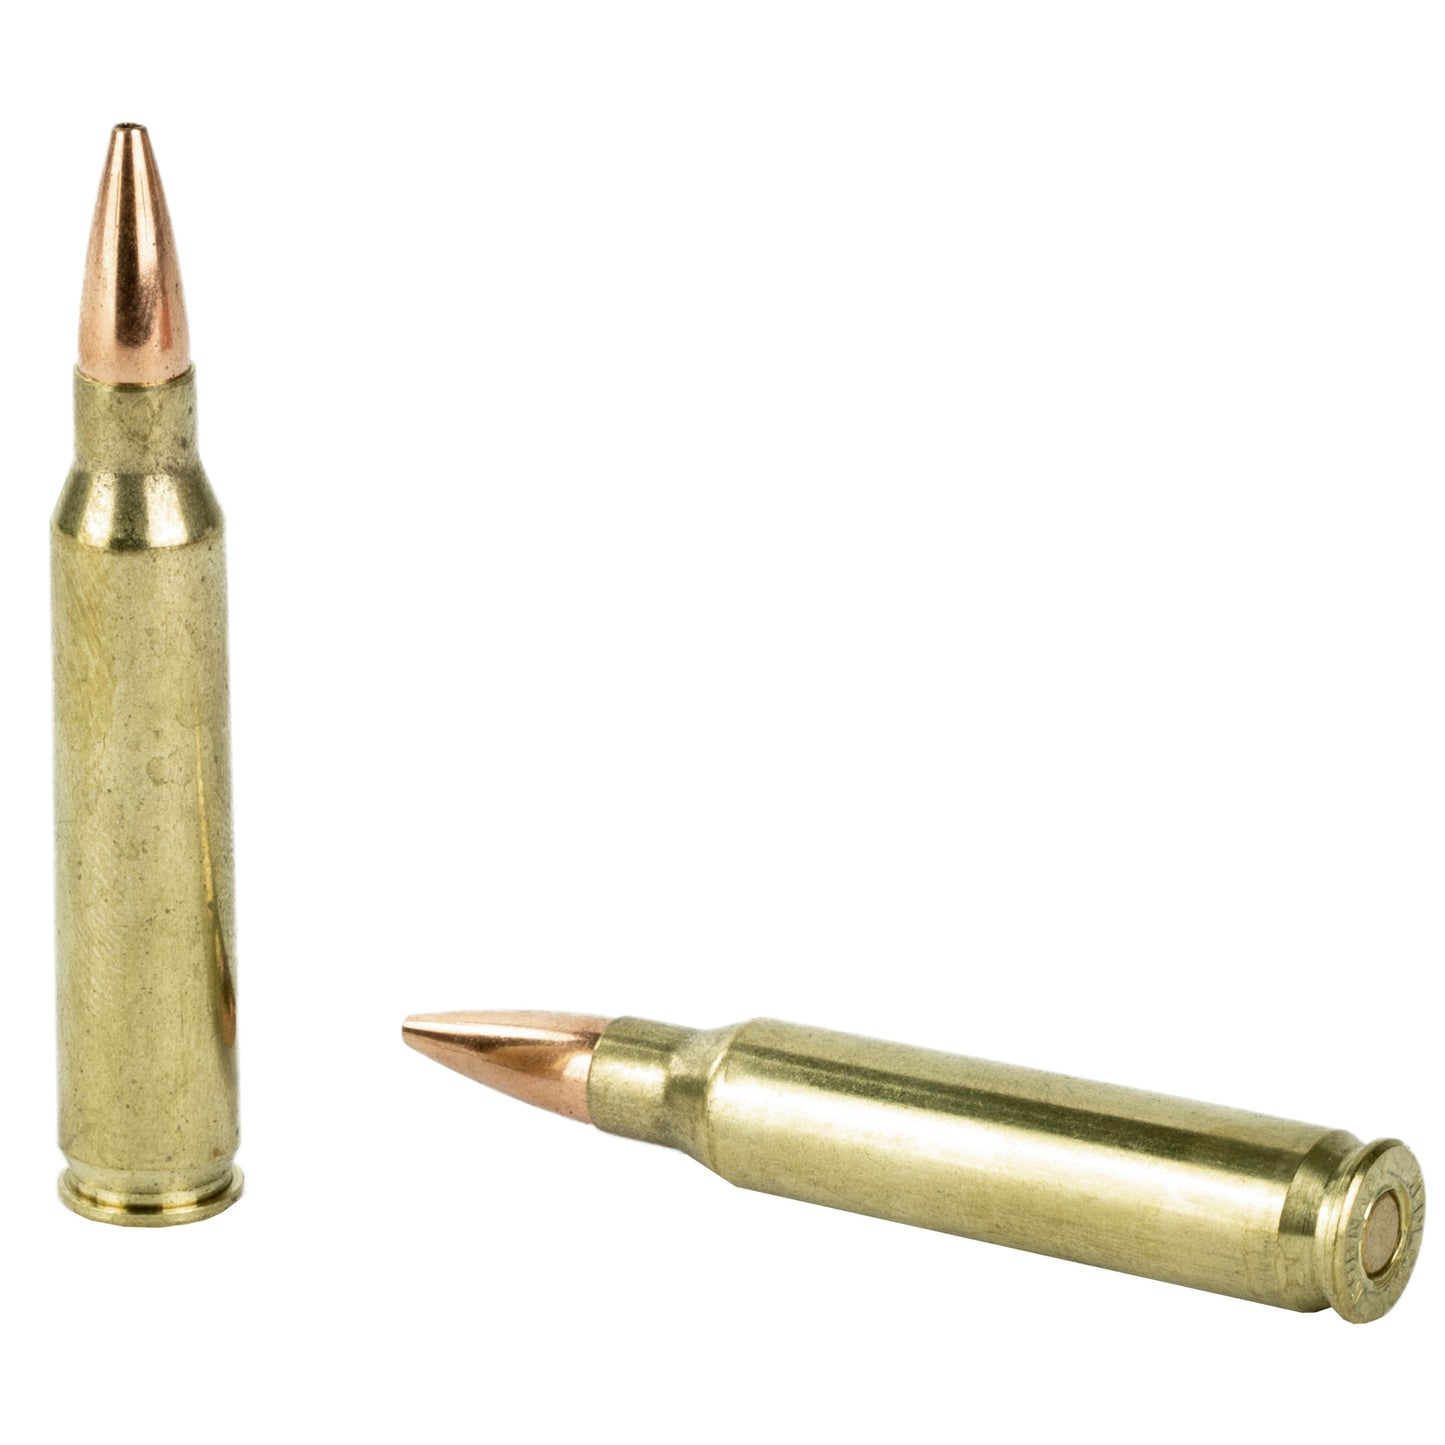 Hornady, SuperFormance, .223 Remington, 75 Grain, Boat Tail, Hollow Point, Match, 20 Round Box